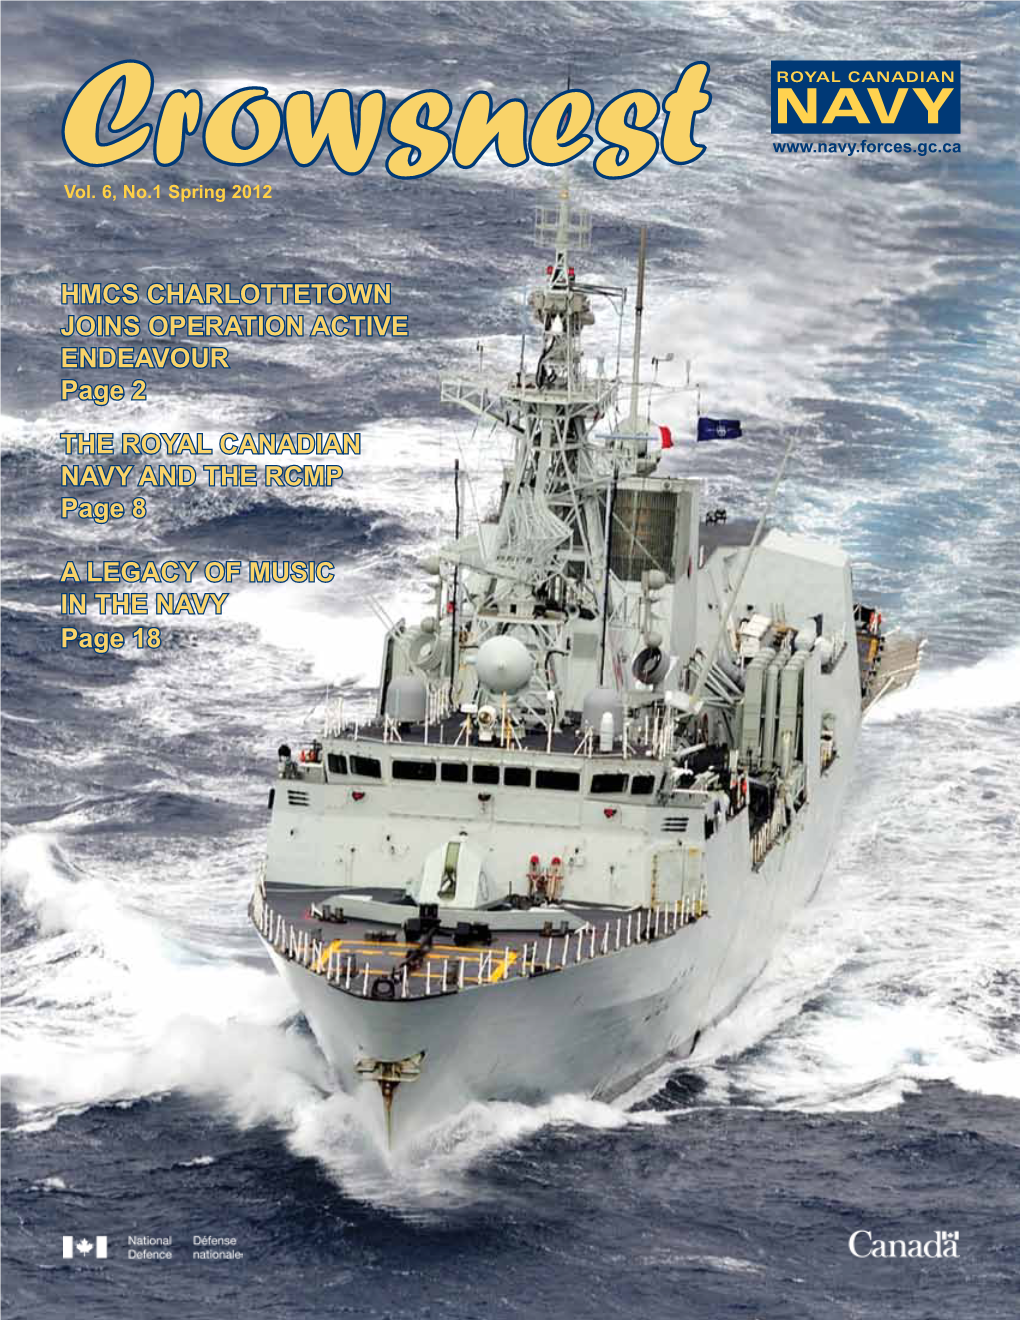 HMCS CHARLOTTETOWN JOINS OPERATION ACTIVE ENDEAVOUR Page 2 the ROYAL CANADIAN NAVY and the RCMP Page 8 a LEGACY of MUSIC